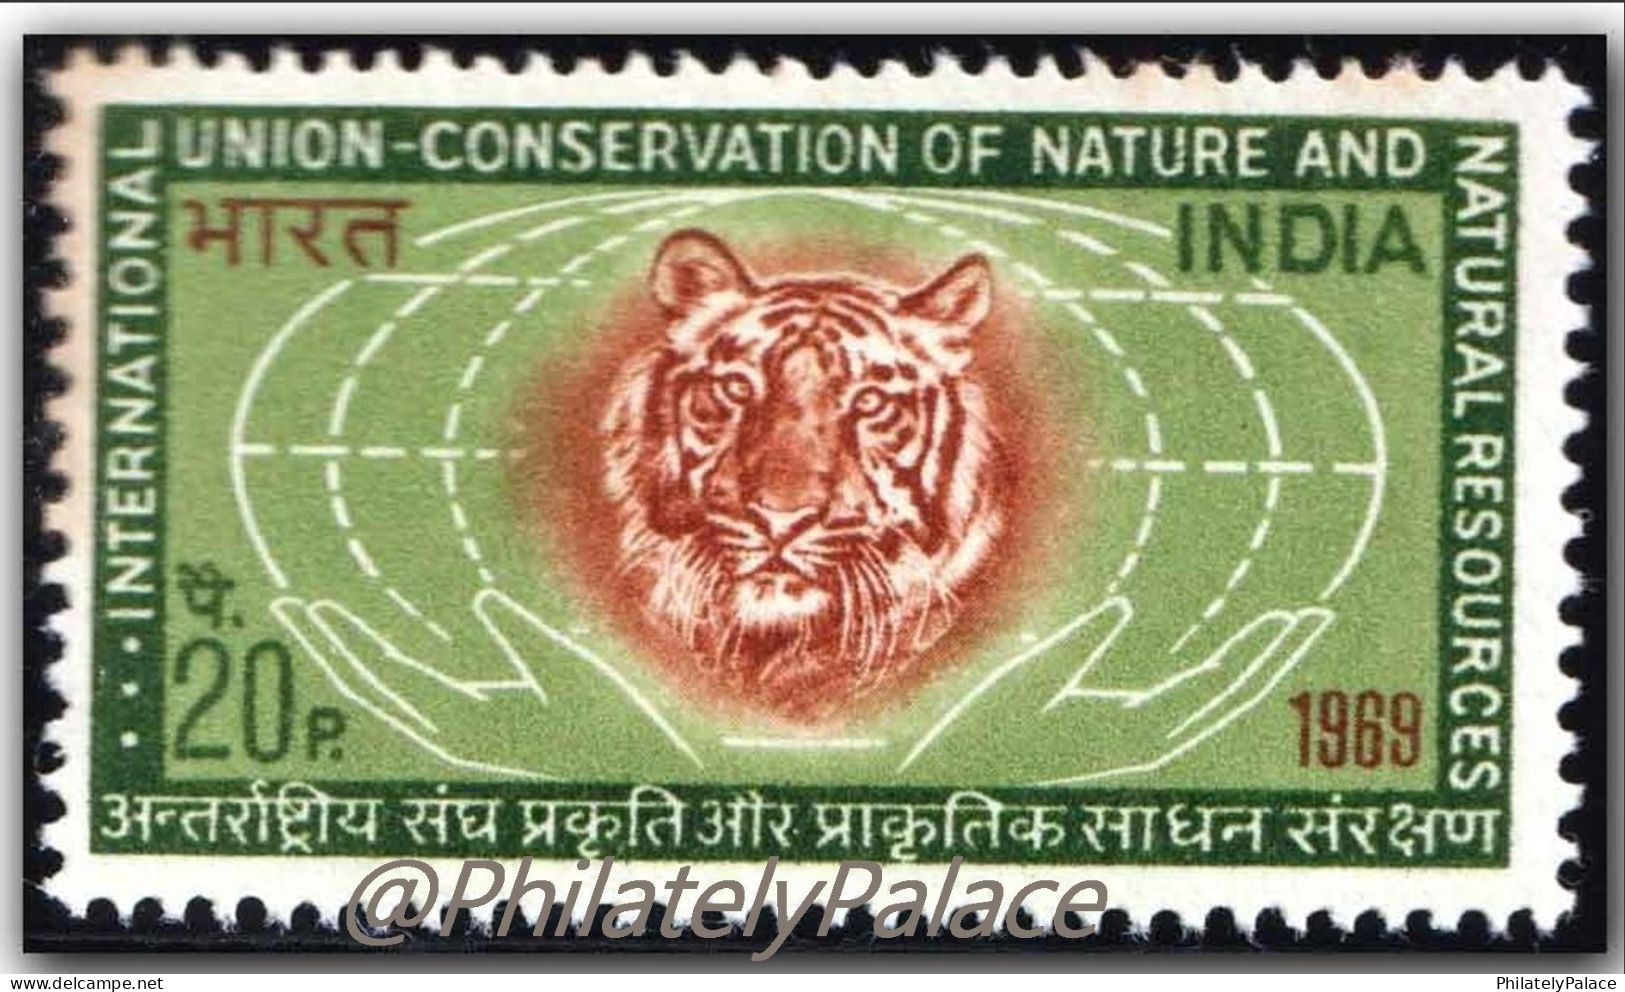 India 1969 International Union For The Conservation Of Nature And Natural Resources Conference MNH (**) Inde Indien - Ongebruikt